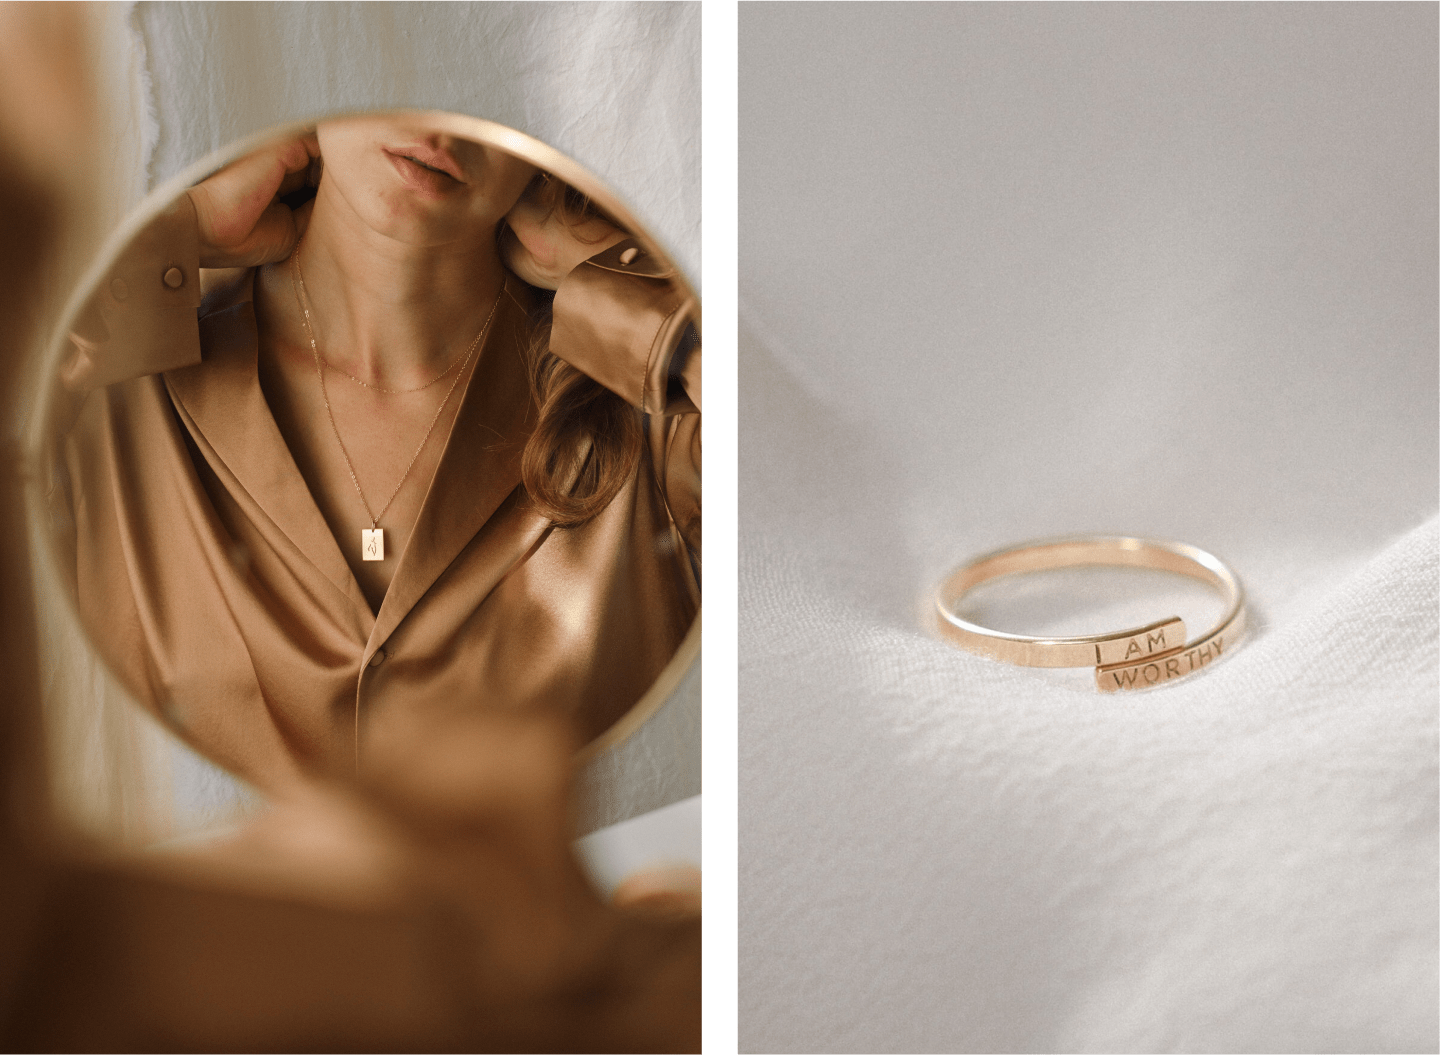 Home for Love Marseille Necklace + I Am Worthy Ring